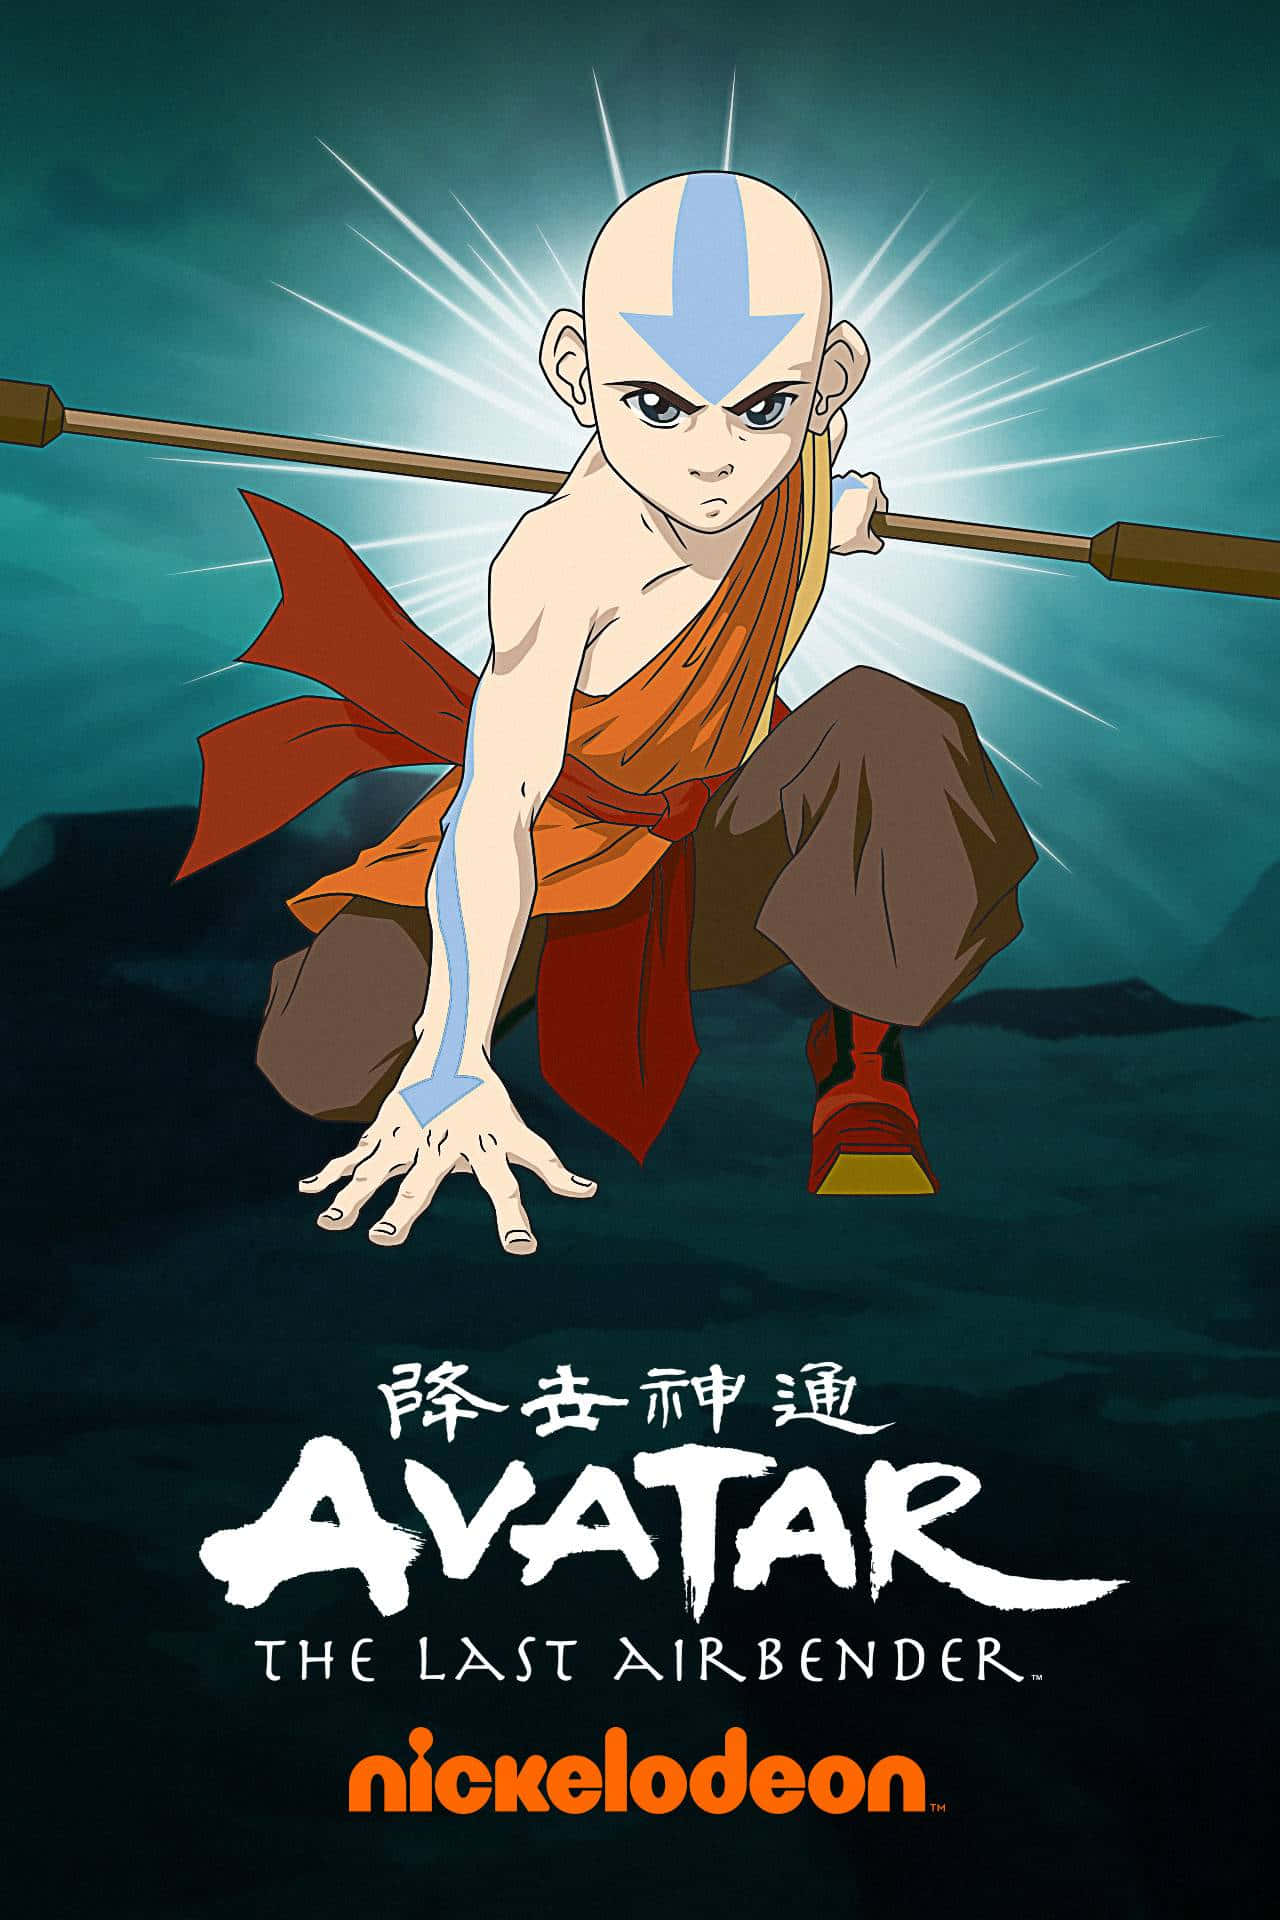 "Aang, the Avatar of the Air Nation"